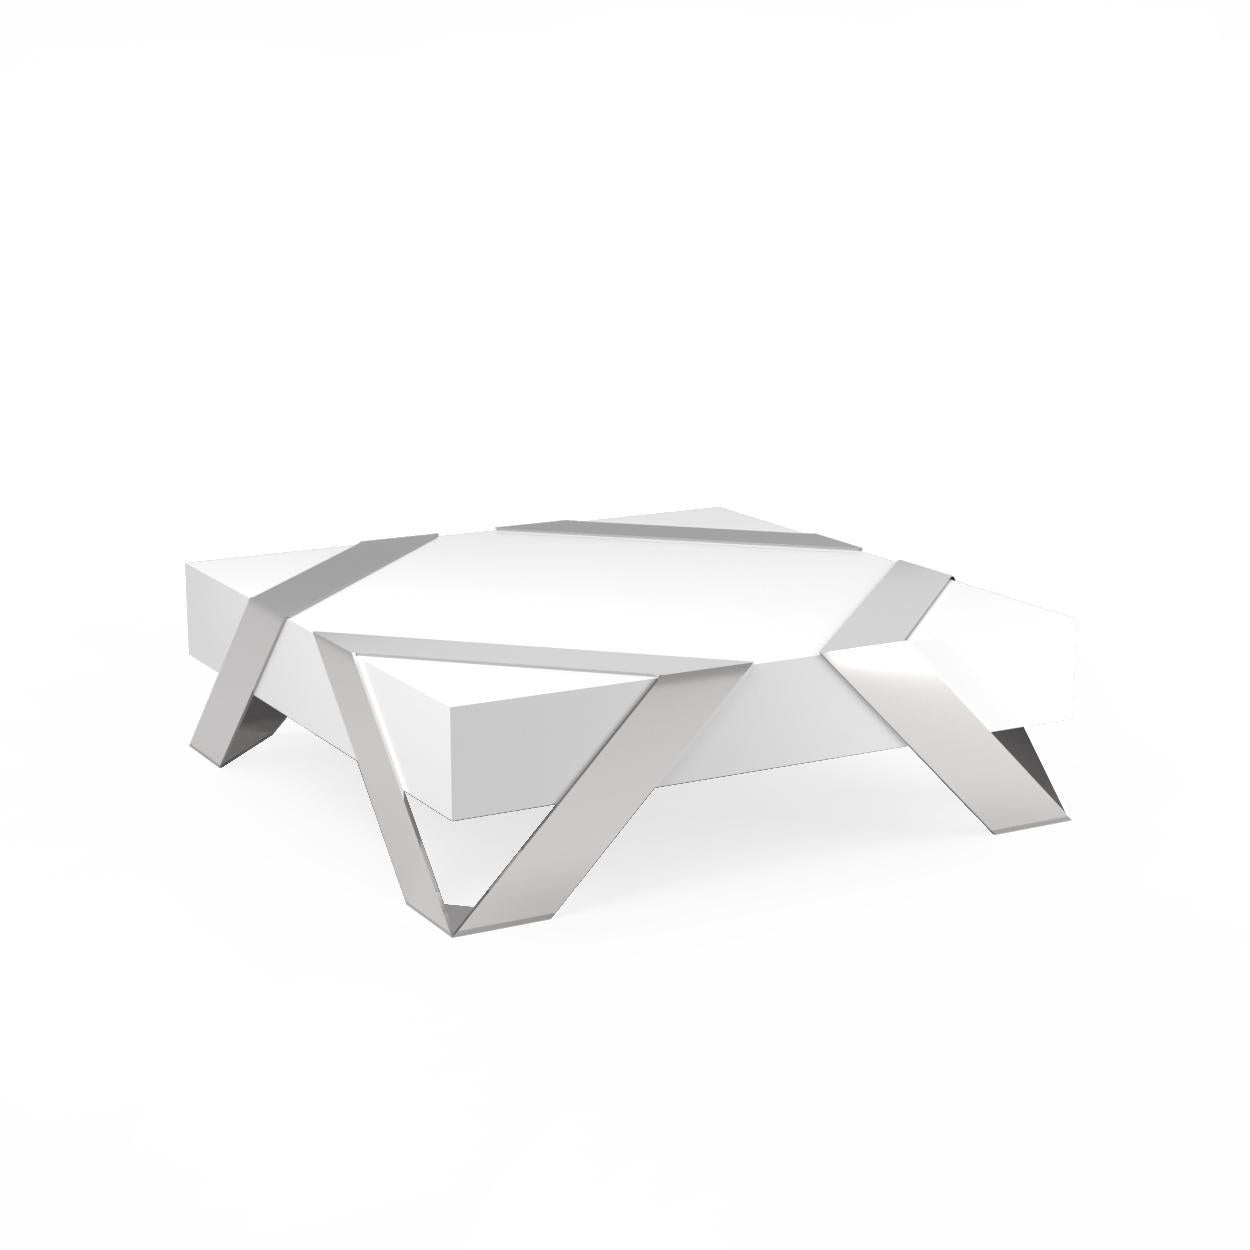 Portuguese Modern Minimalist Square Coffee Table White Lacquer Brushed Stainless Steel For Sale